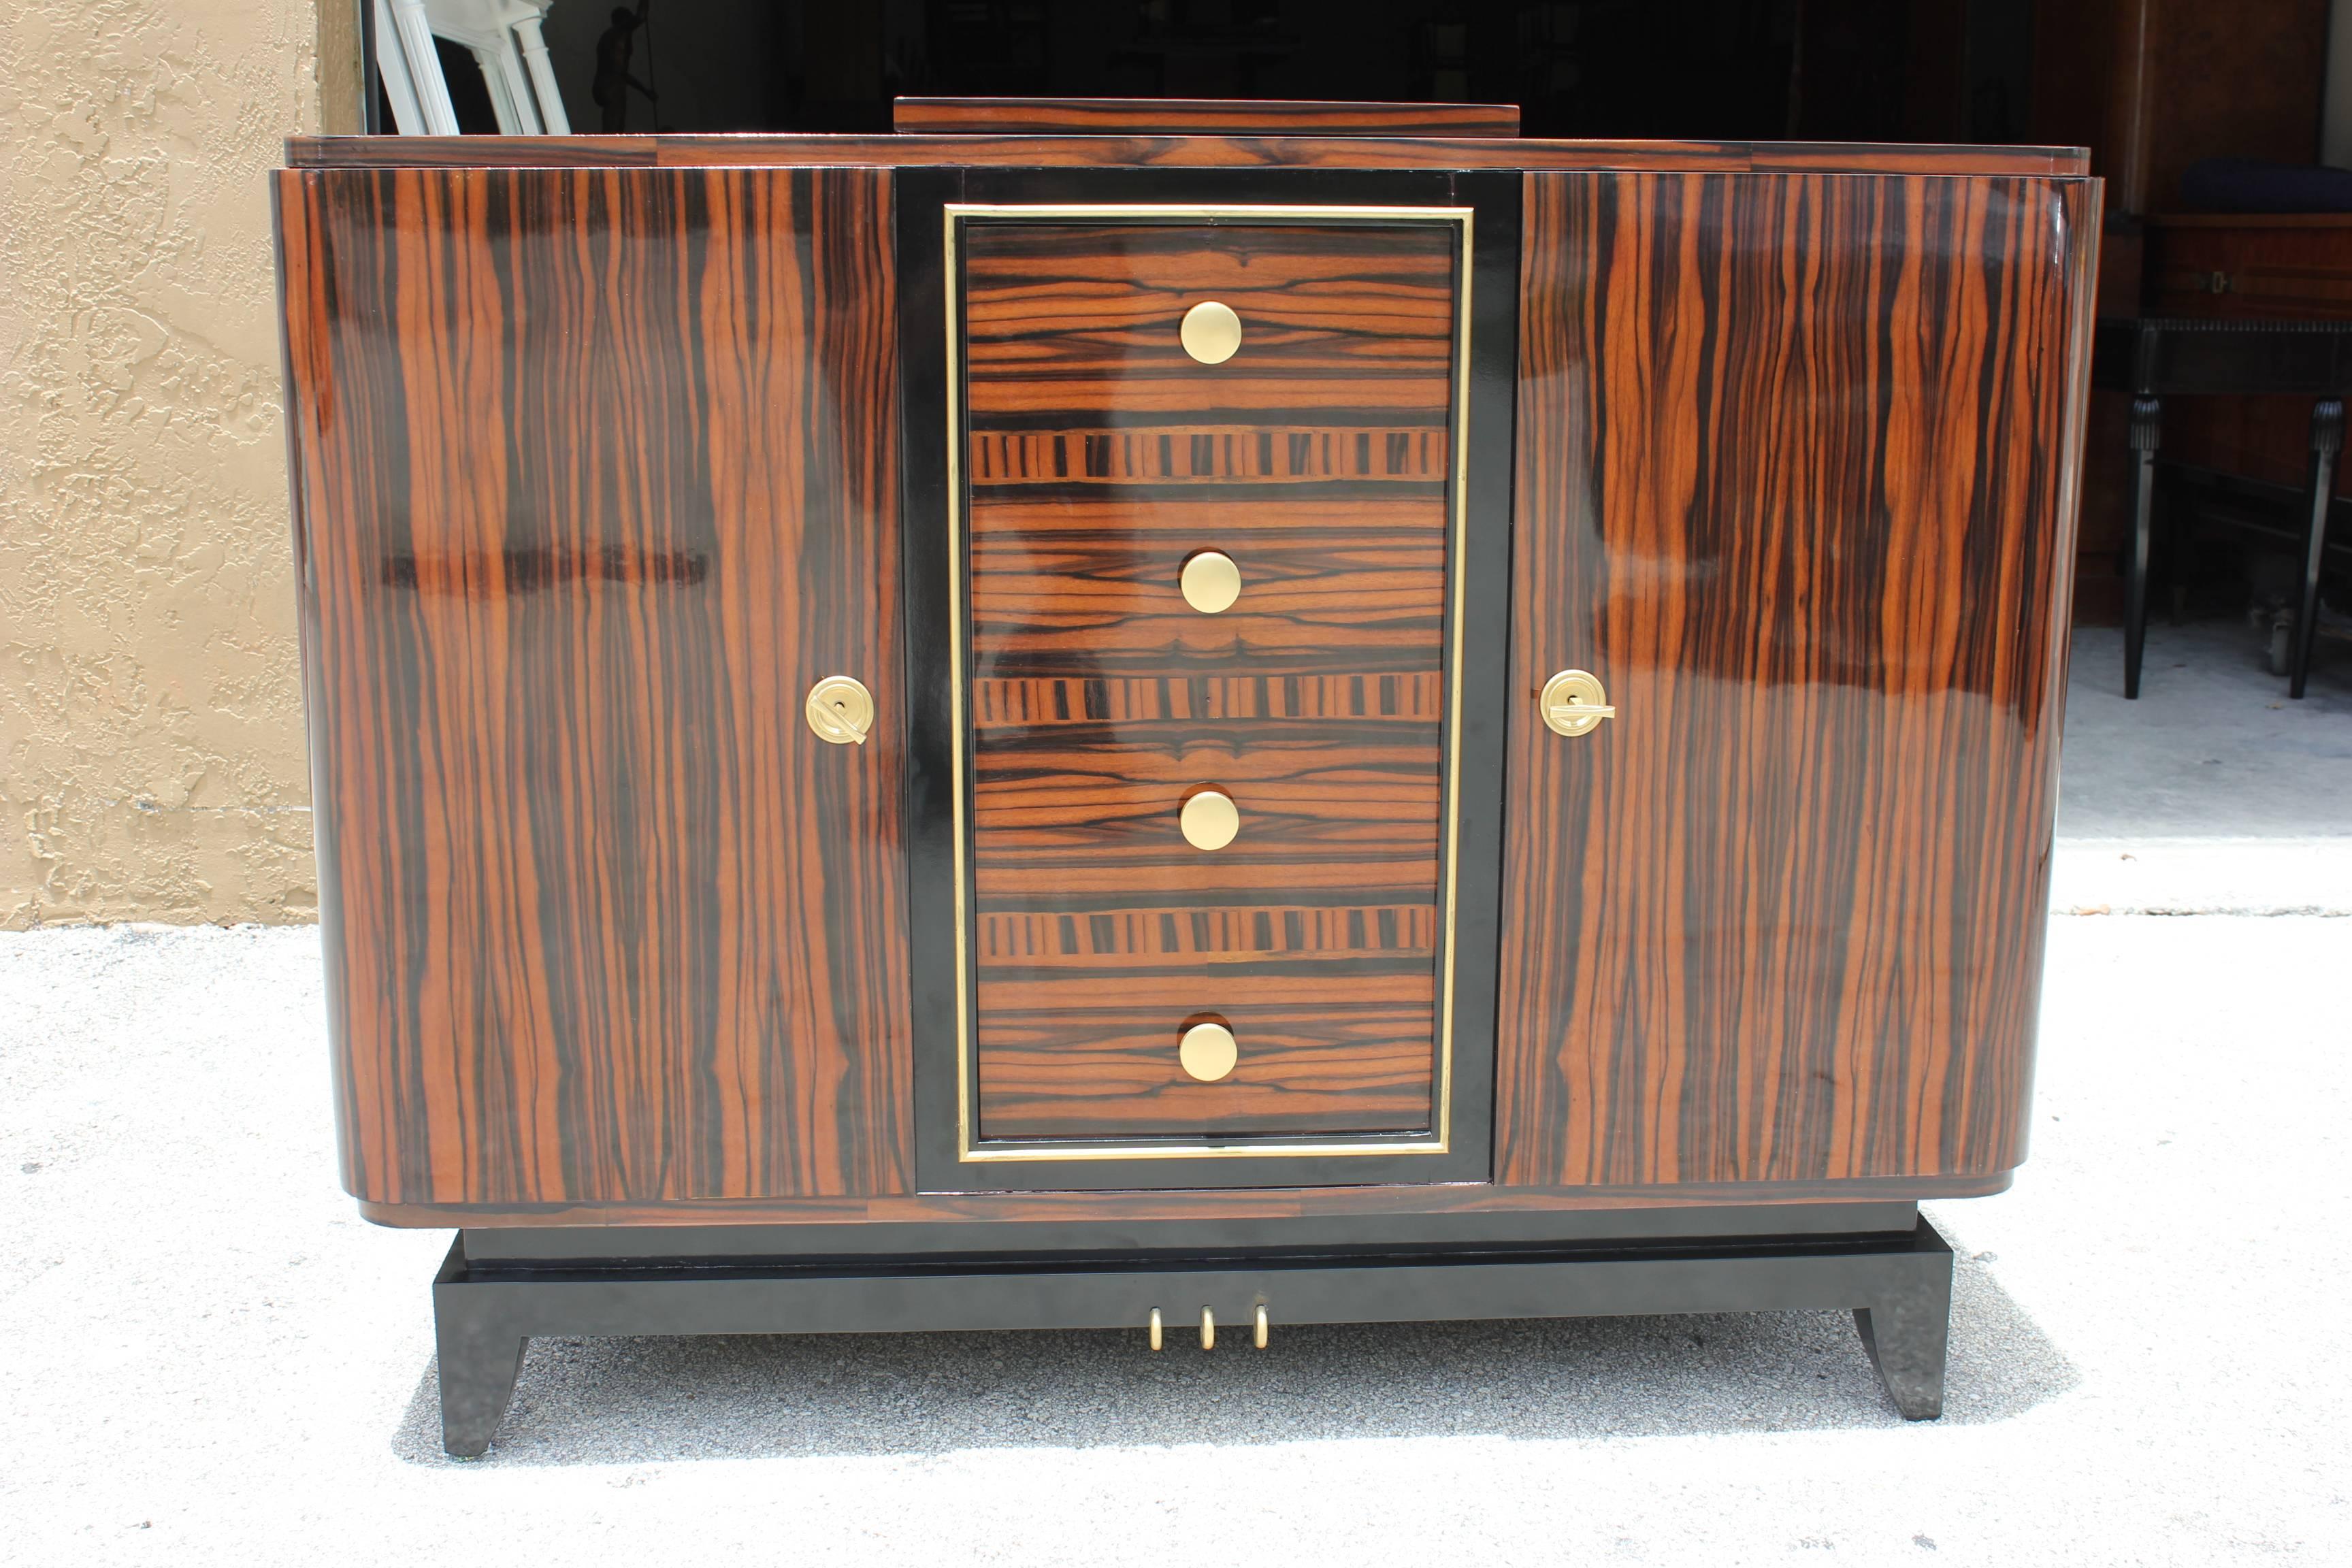 An absolutely stunning French Art Deco exotic macassar ebony bar/ buffet/ cabinet, circa 1940s. Black lacquer base. Top opens to reveal mirrored interior/ serving area. Center door opens to reveal totally mirrored interior with glass shelf. Center